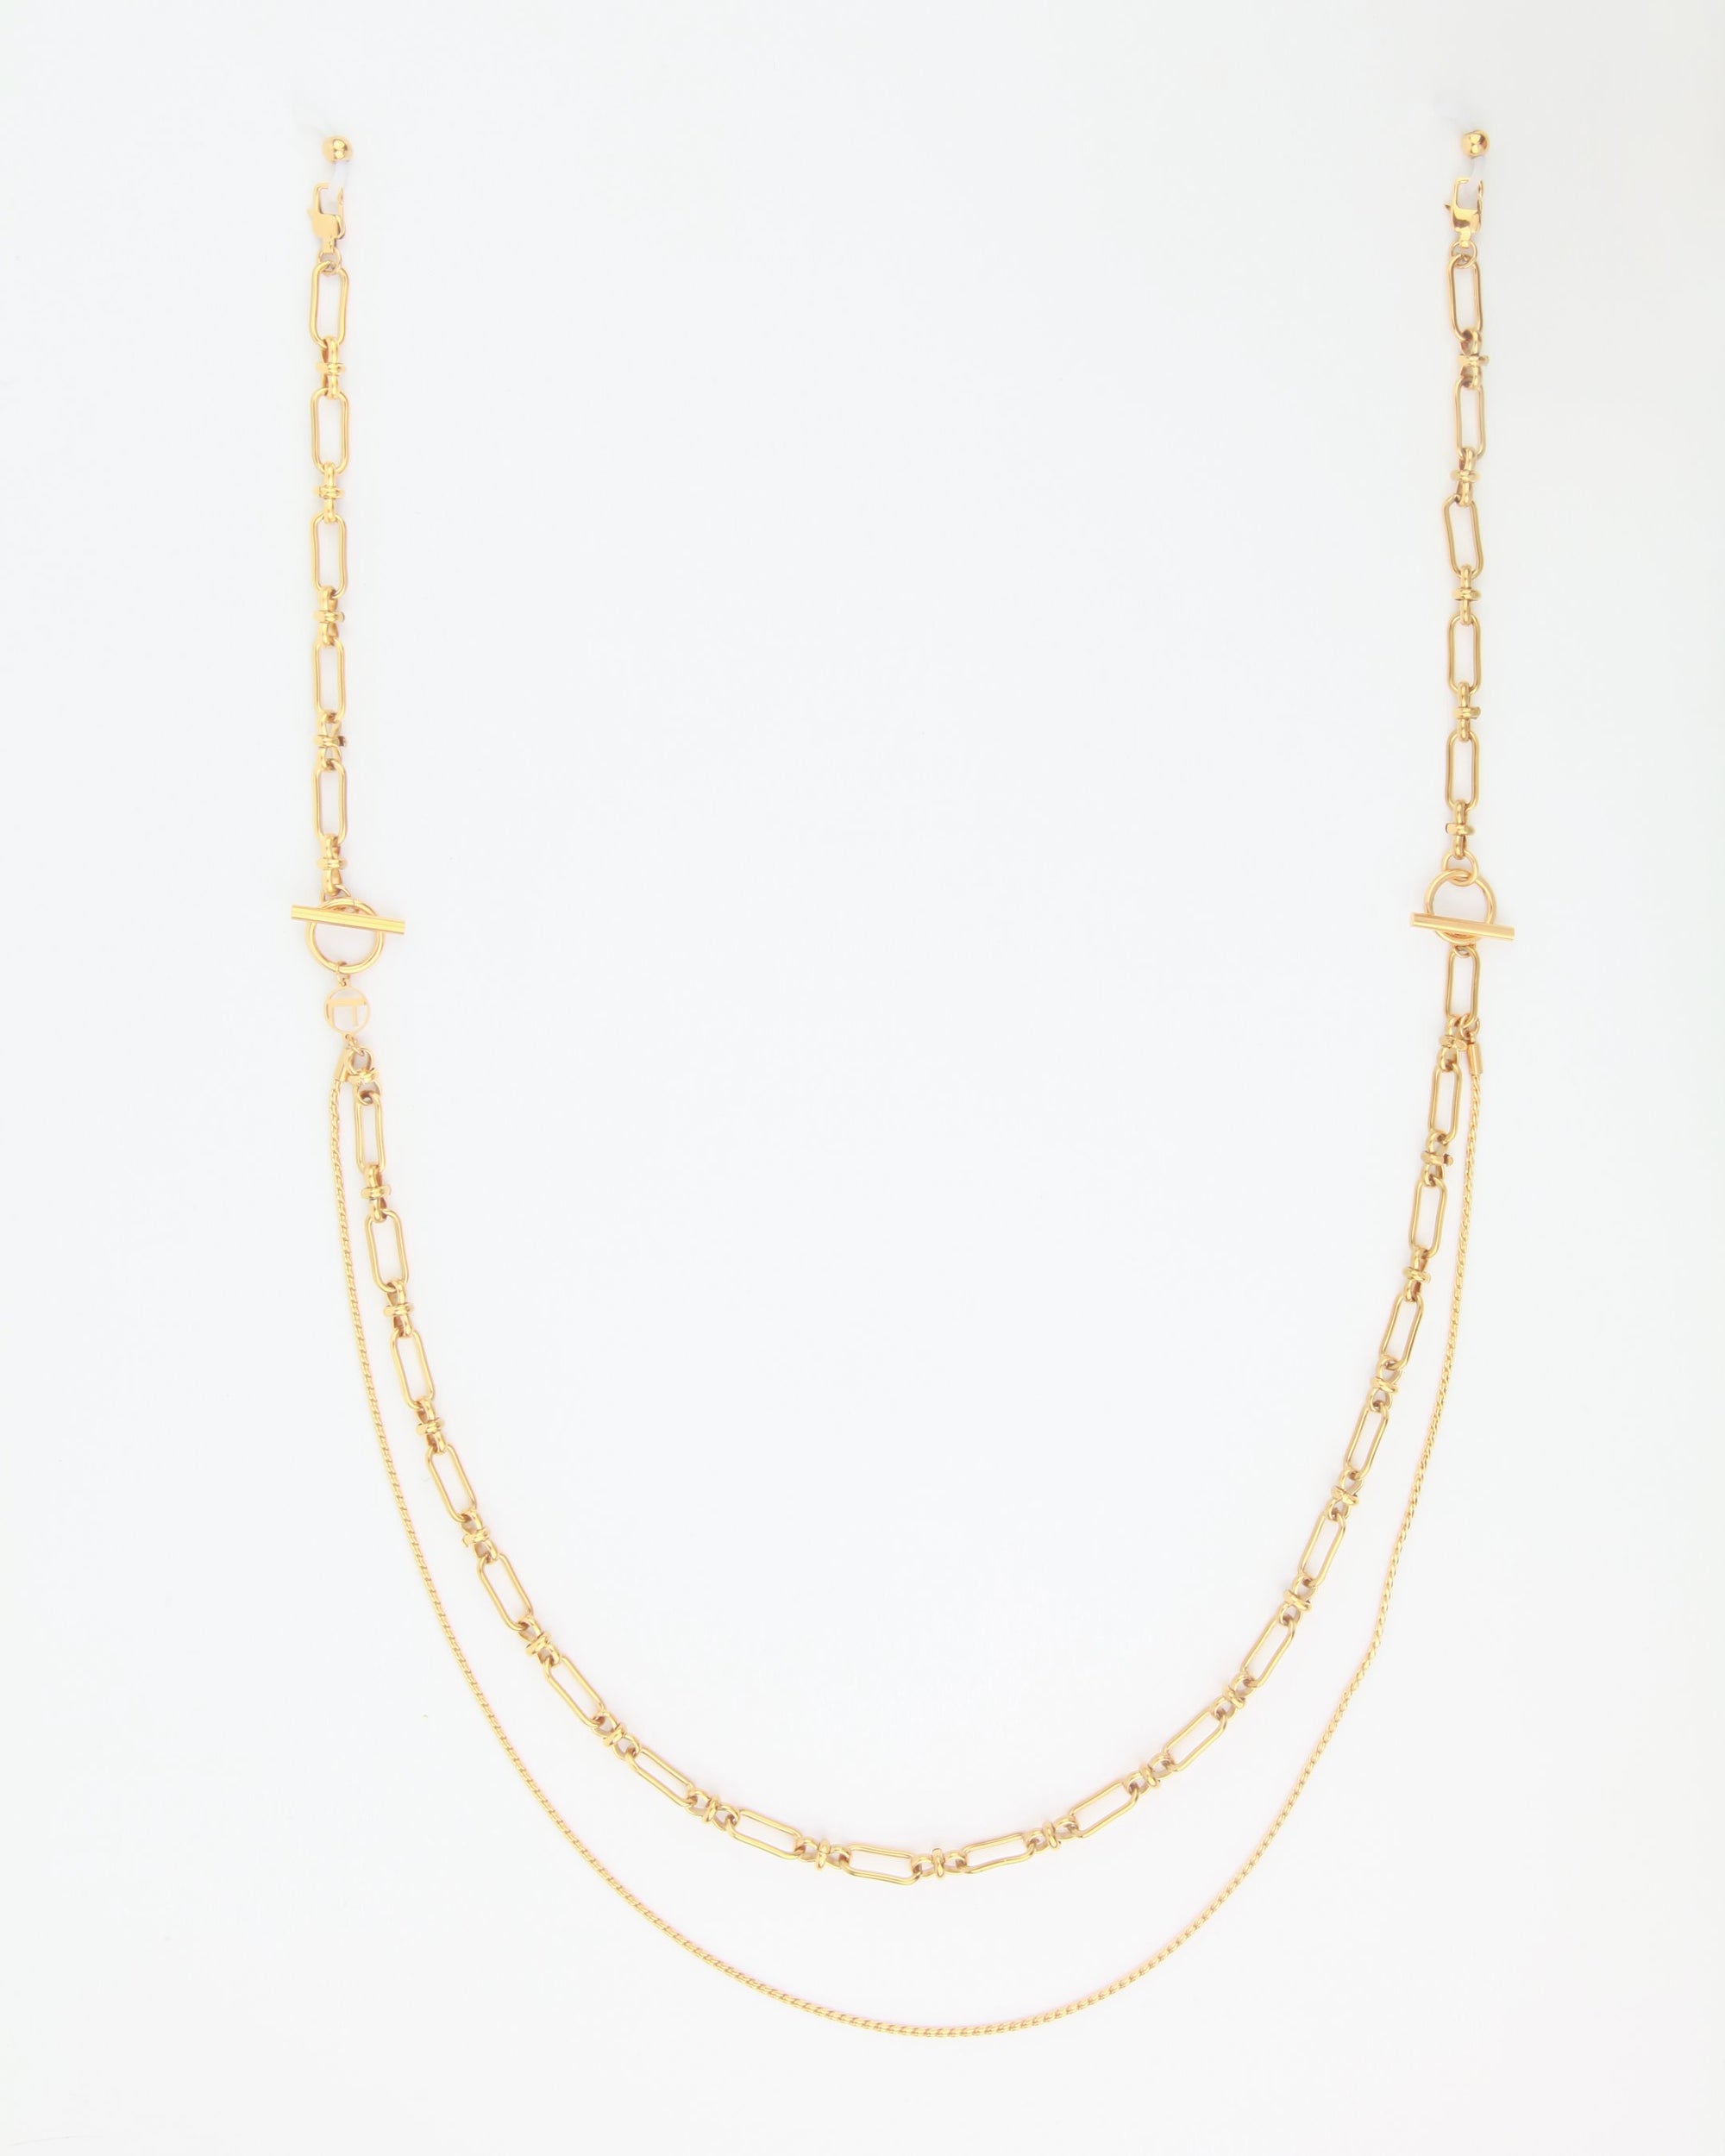 A delicate Vienna Glasses Chain is displayed against a plain white background. The 18-karat gold-plated piece by For Art&#39;s Sake® features two types of chains: one with elongated oval links and the other a smooth, fine chain, creating a layered effect. The clasp is a T-bar style.